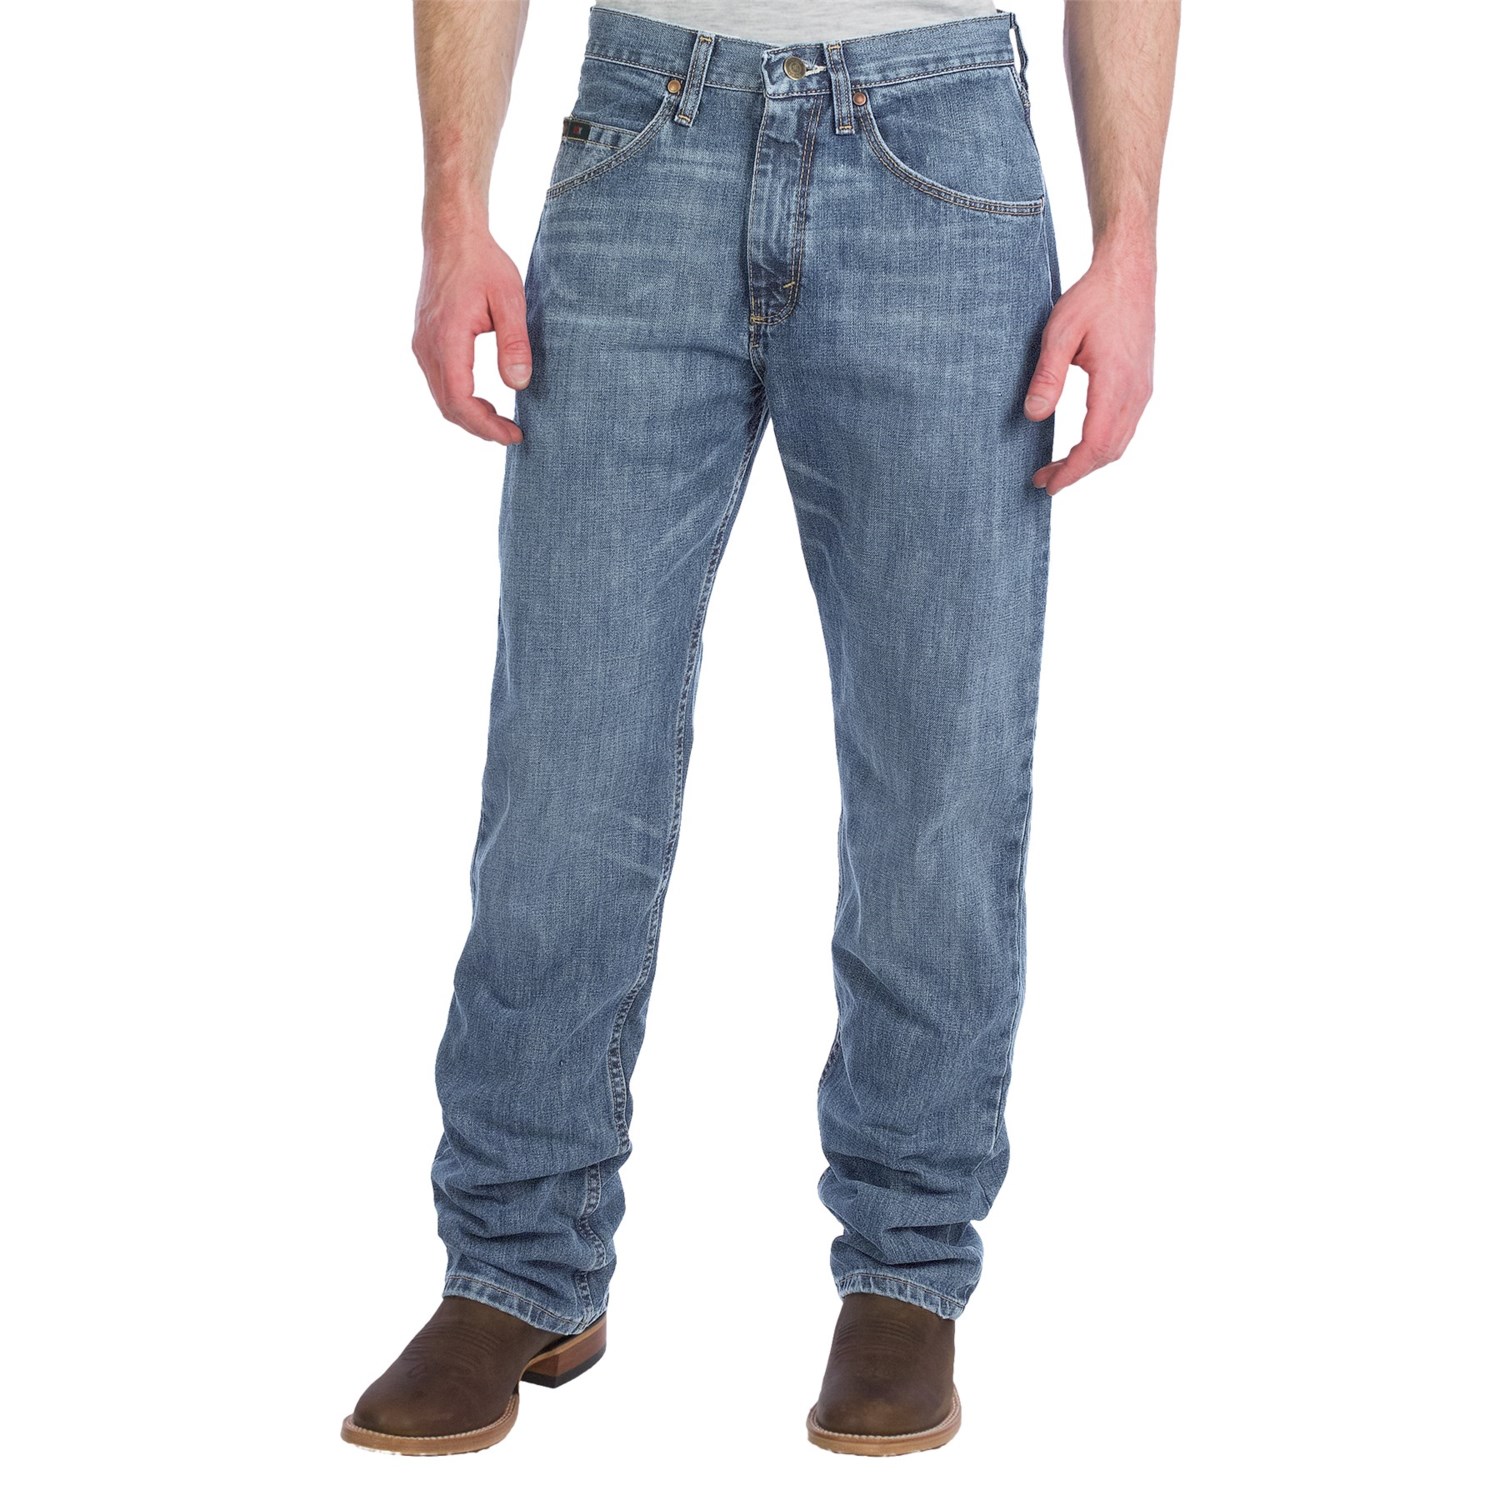 Wrangler 20X Competition Jeans (For Men) - Save 42%